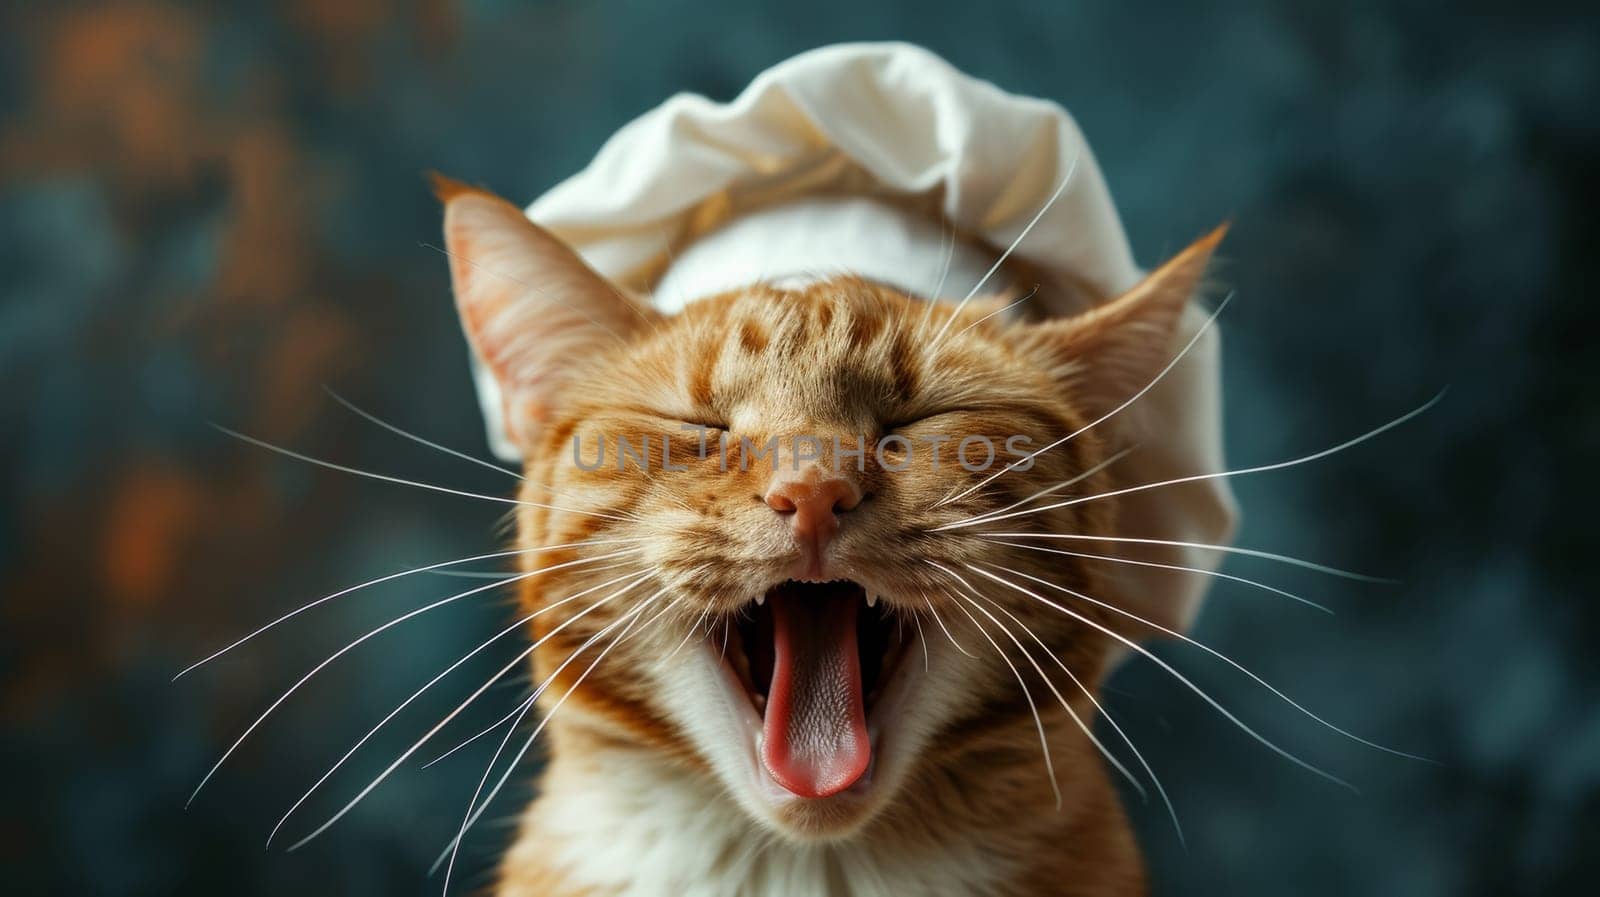 A cat wearing a chef's hat with its mouth open